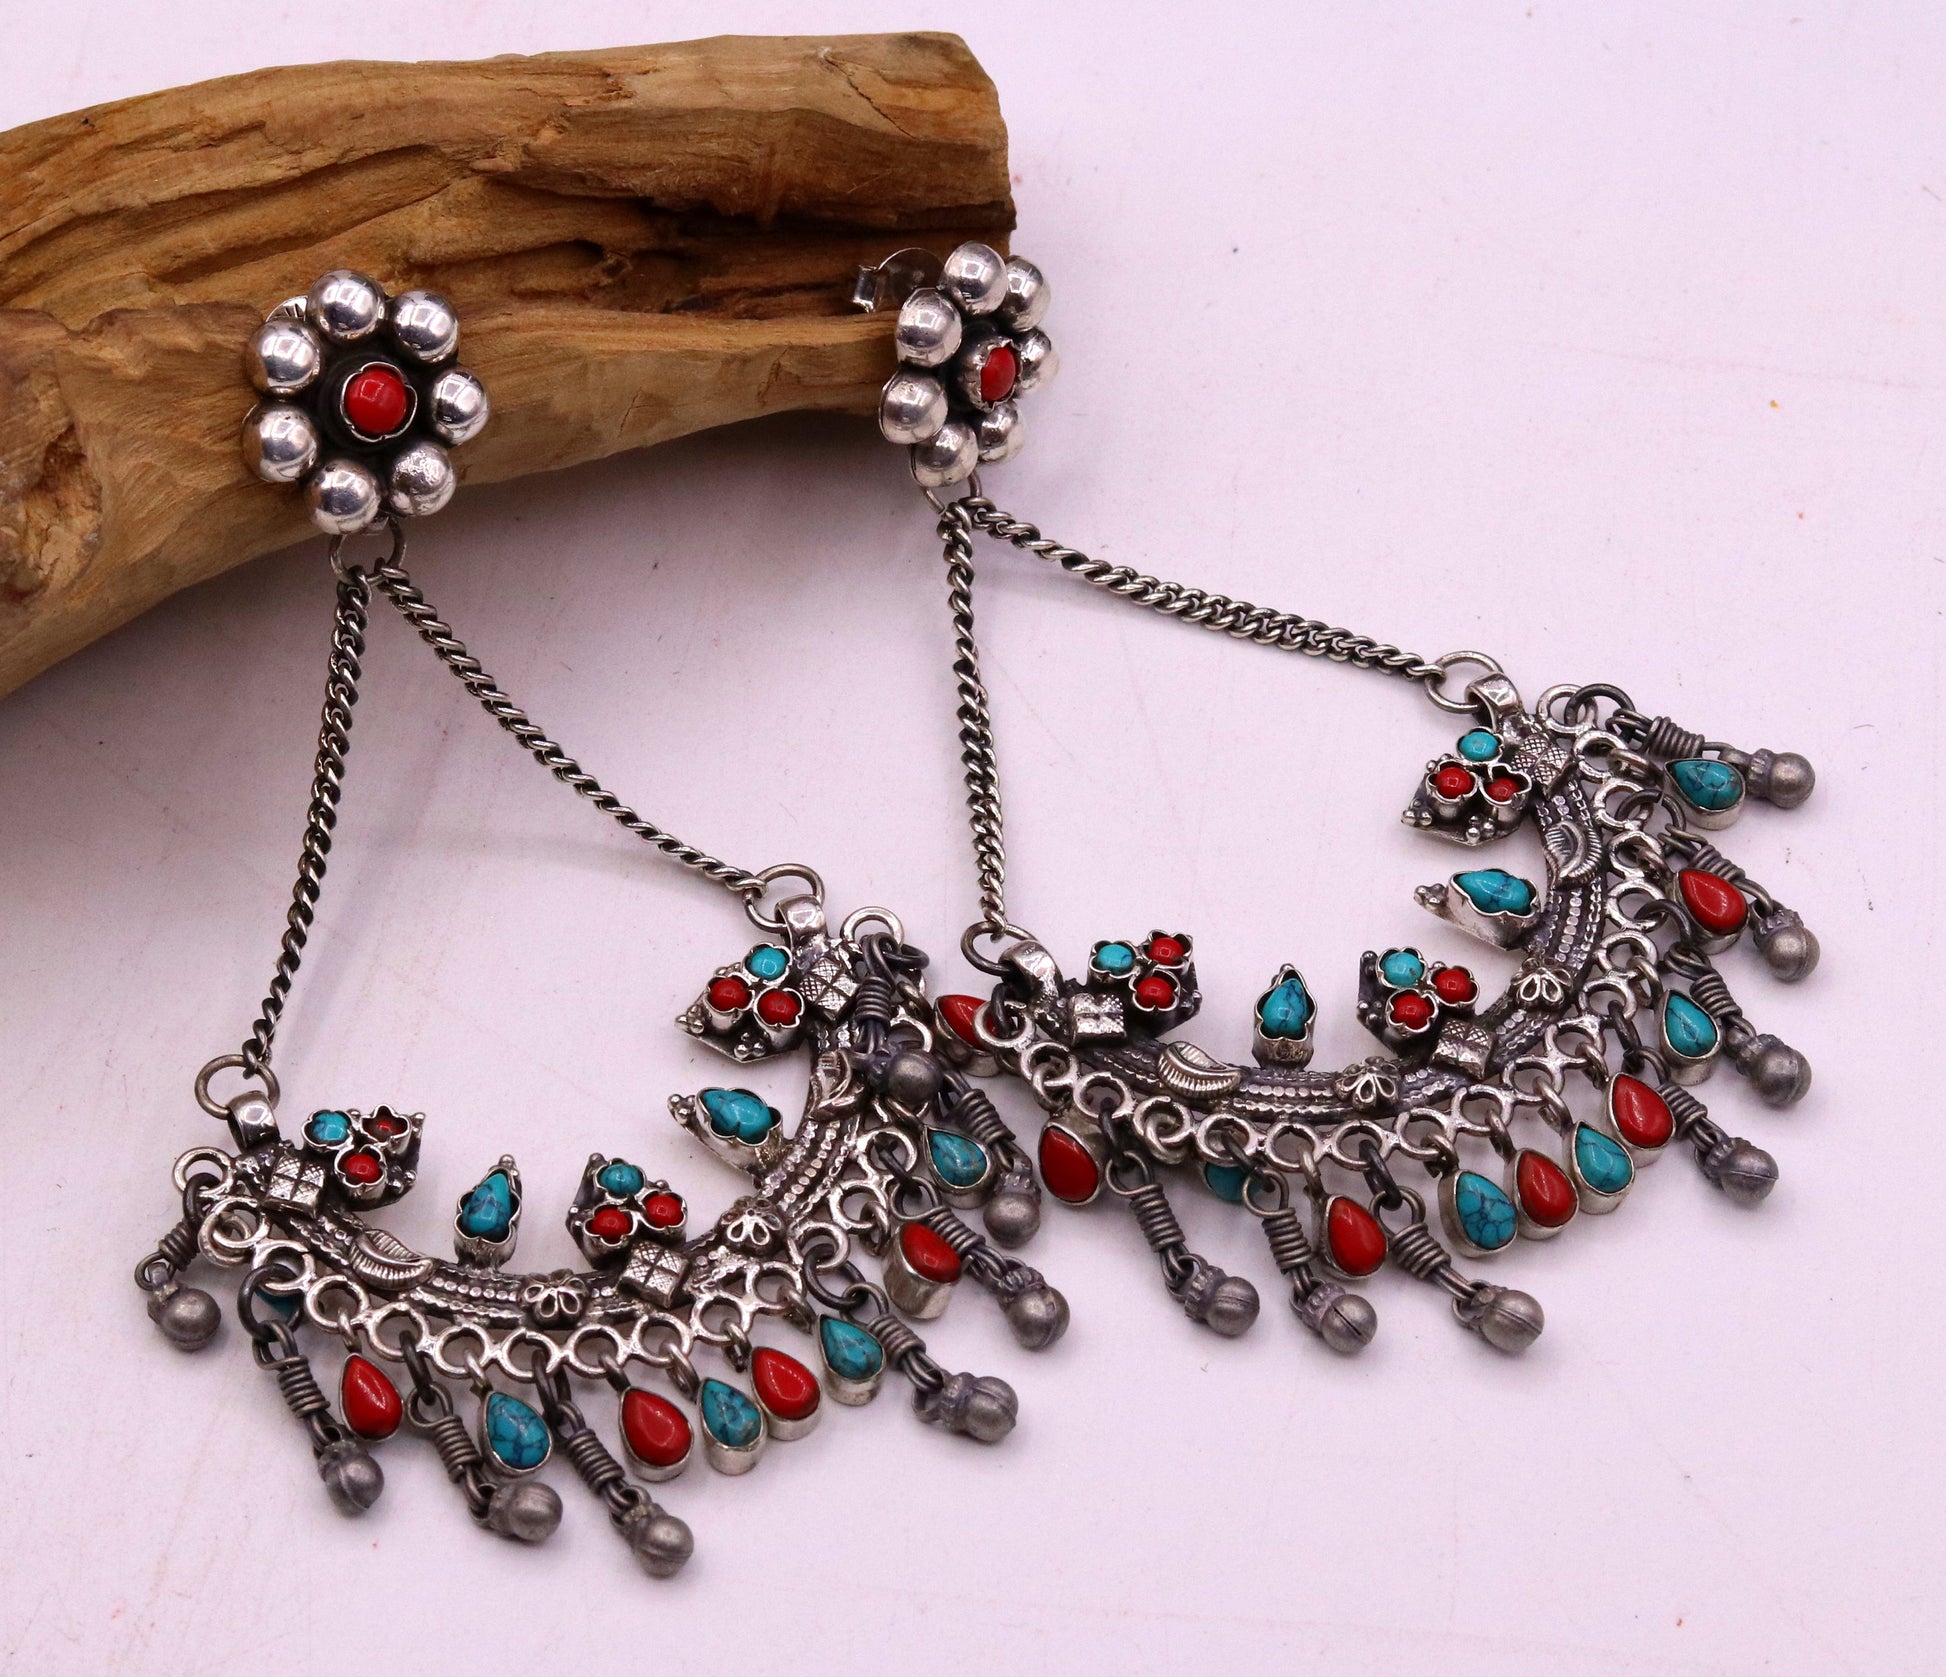 925 sterling silver handmade turquoise and coral stone fabulous long charm earring stud, drop dangle chandbala chandelier style jewelry s723 - TRIBAL ORNAMENTS